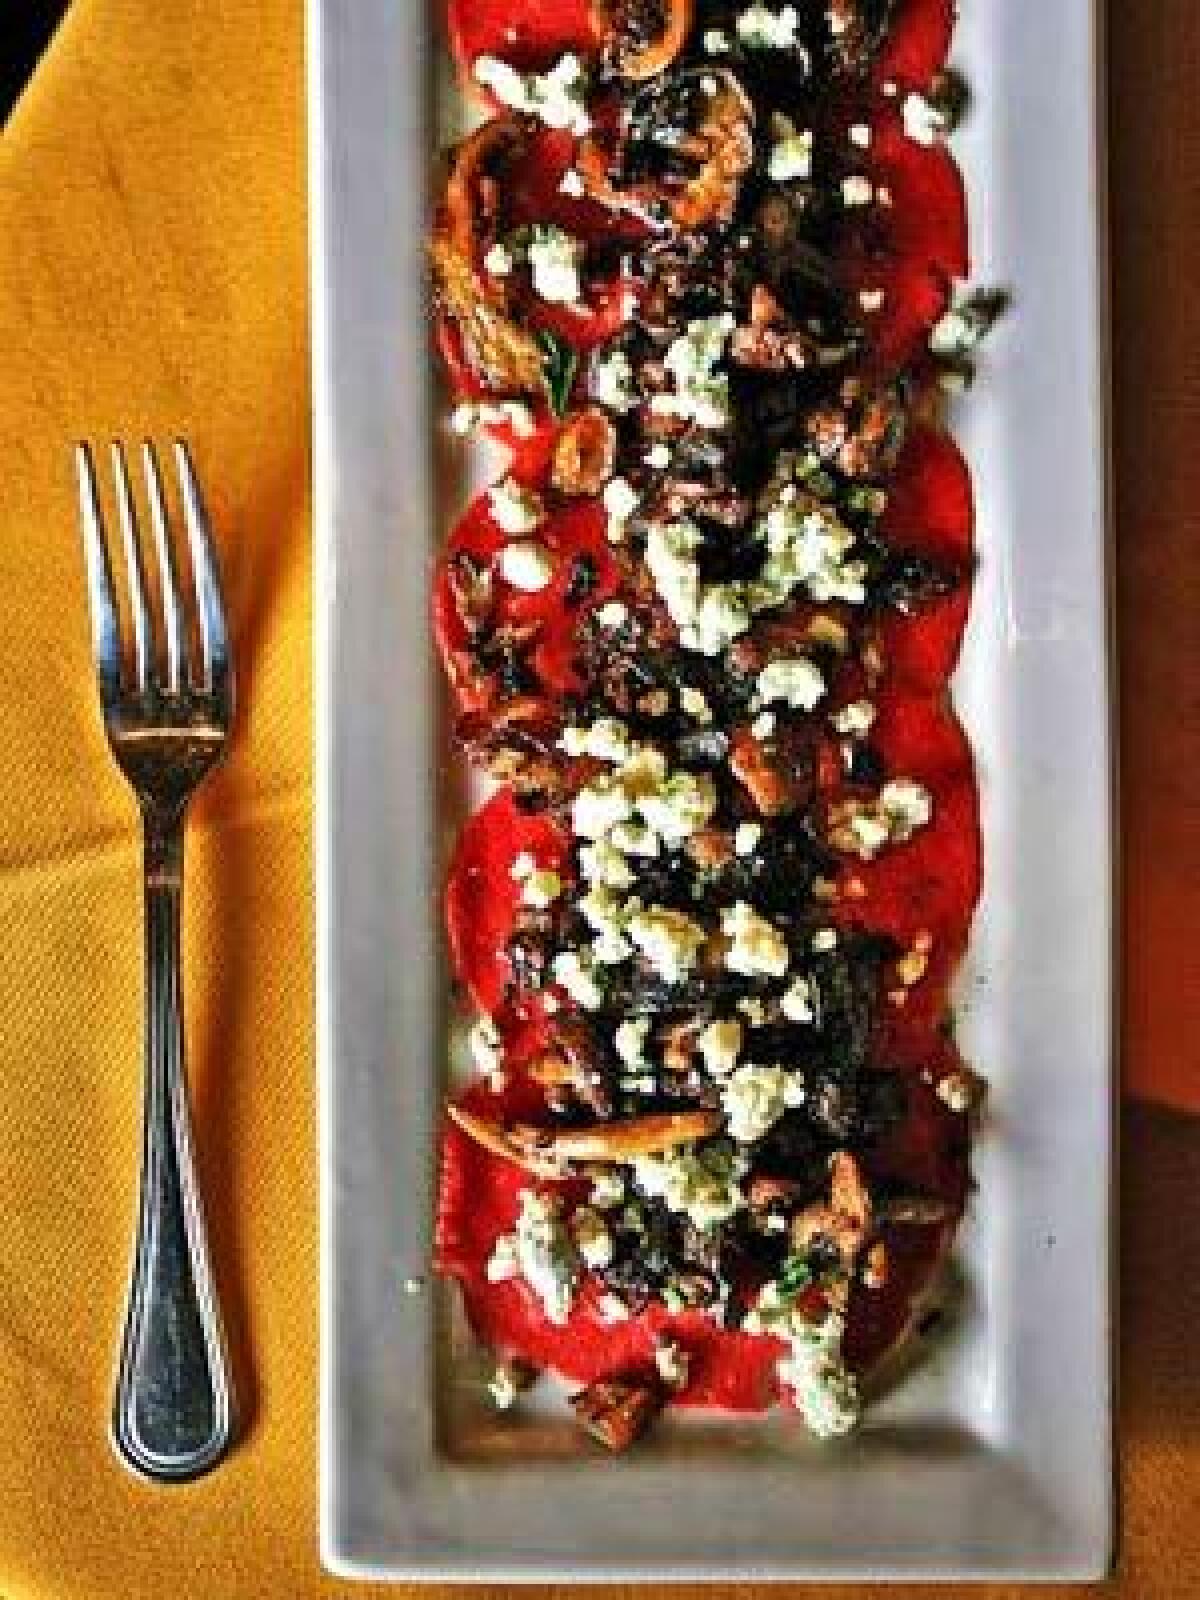 Beef carpaccio with roasted wild mushrooms, blue cheese, extra virgin olive oil and fresh pepper is served at Firenze Osteria in Toluca Lake.